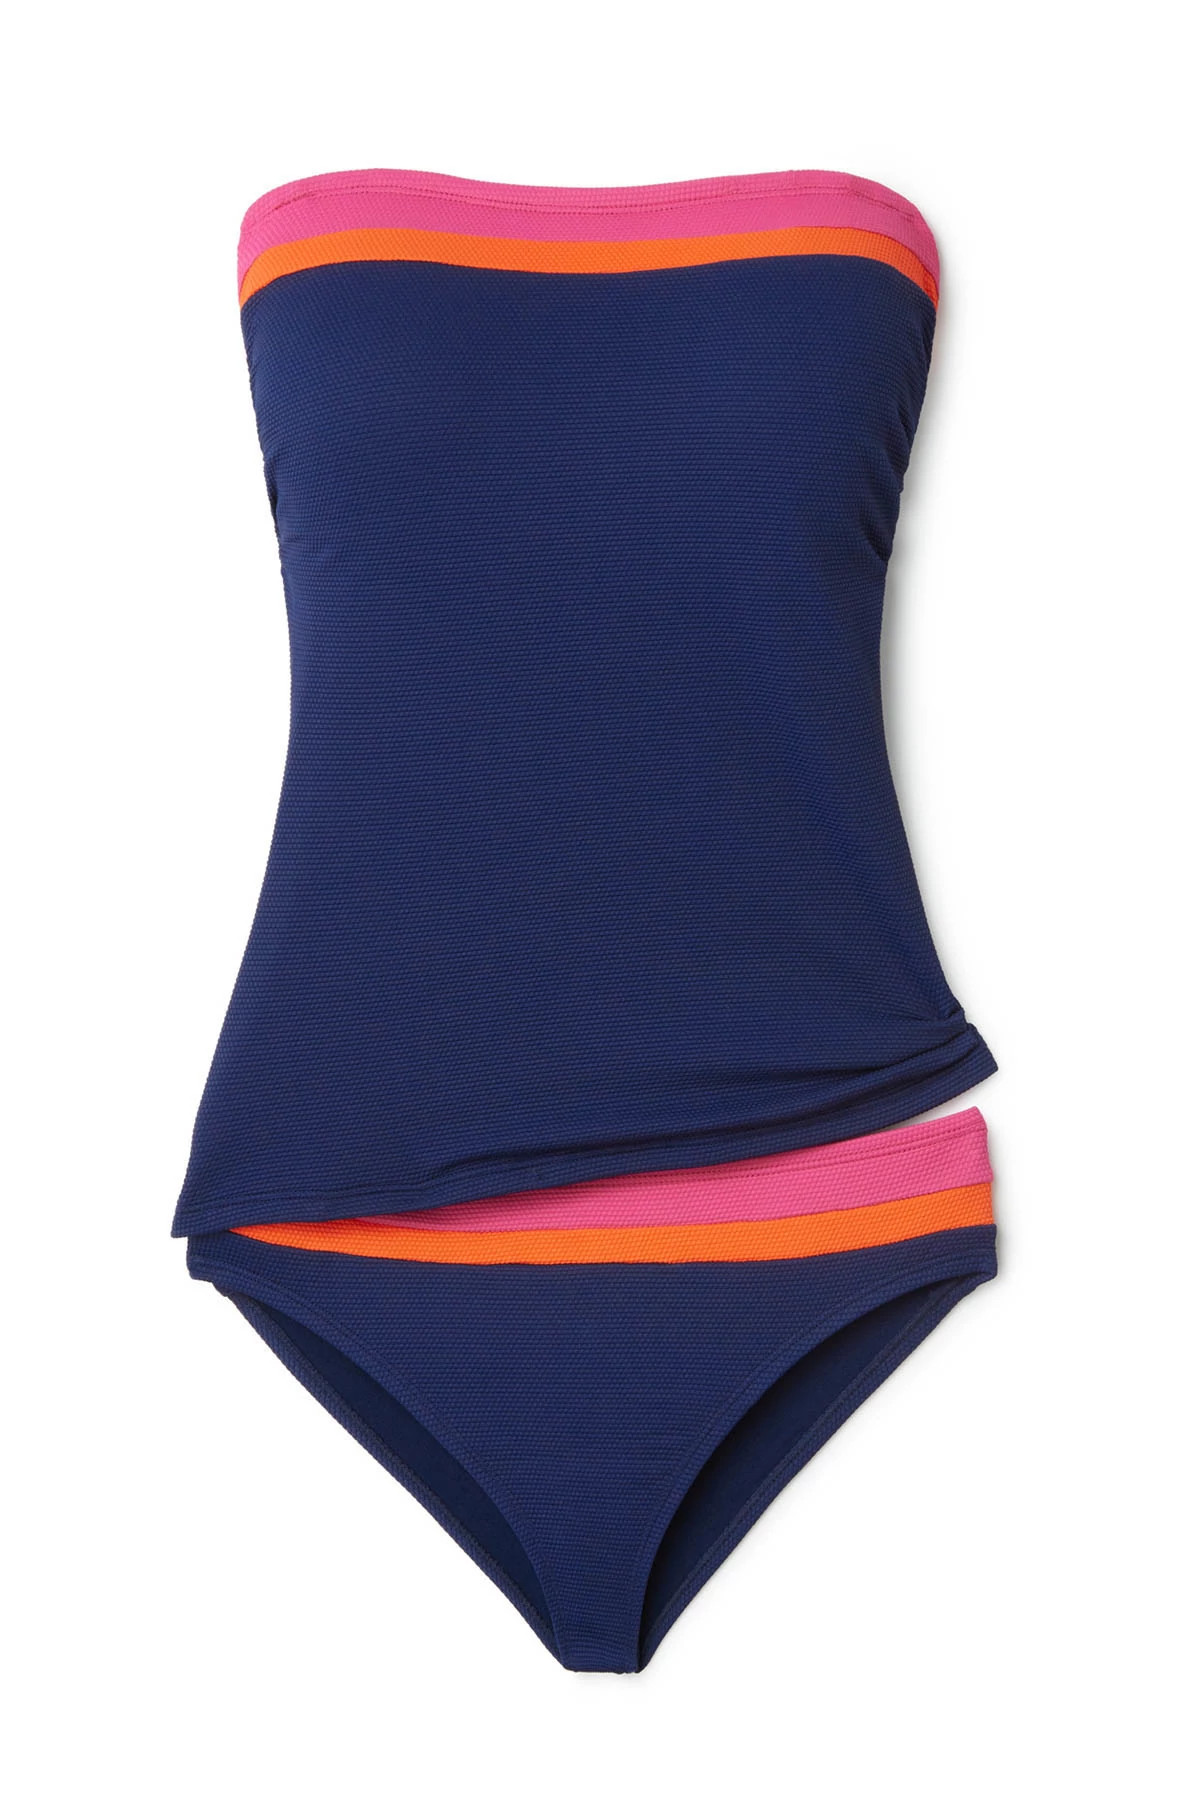 PASSION PINK Colorblock Bandini Molded Bandeau Tankini Top image number 4